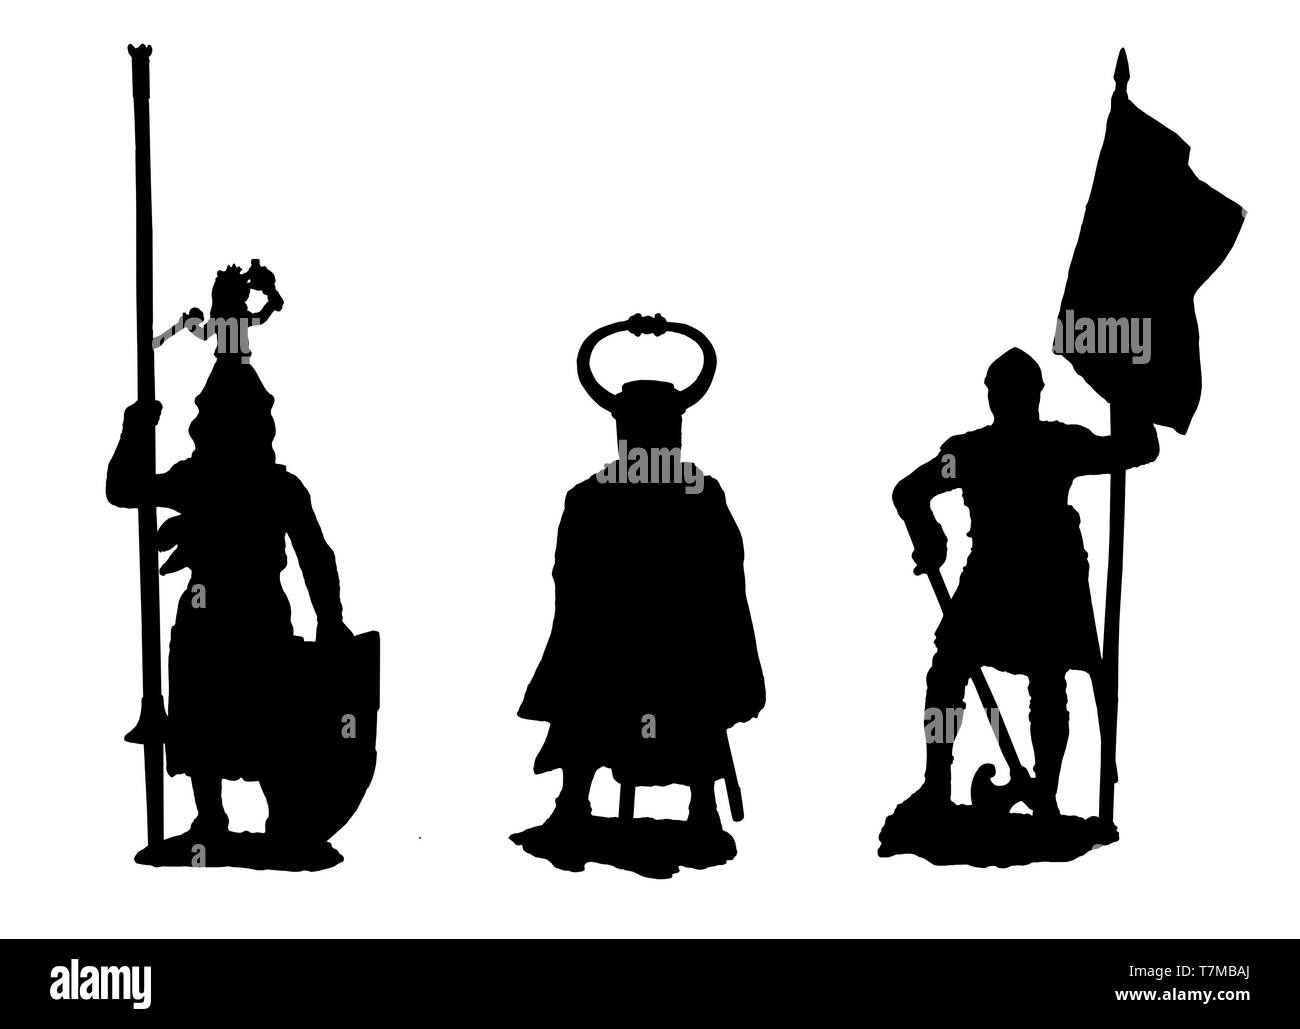 Medieval knights illustration. Set of 3 knights. Black and white silhouette. Stock Photo